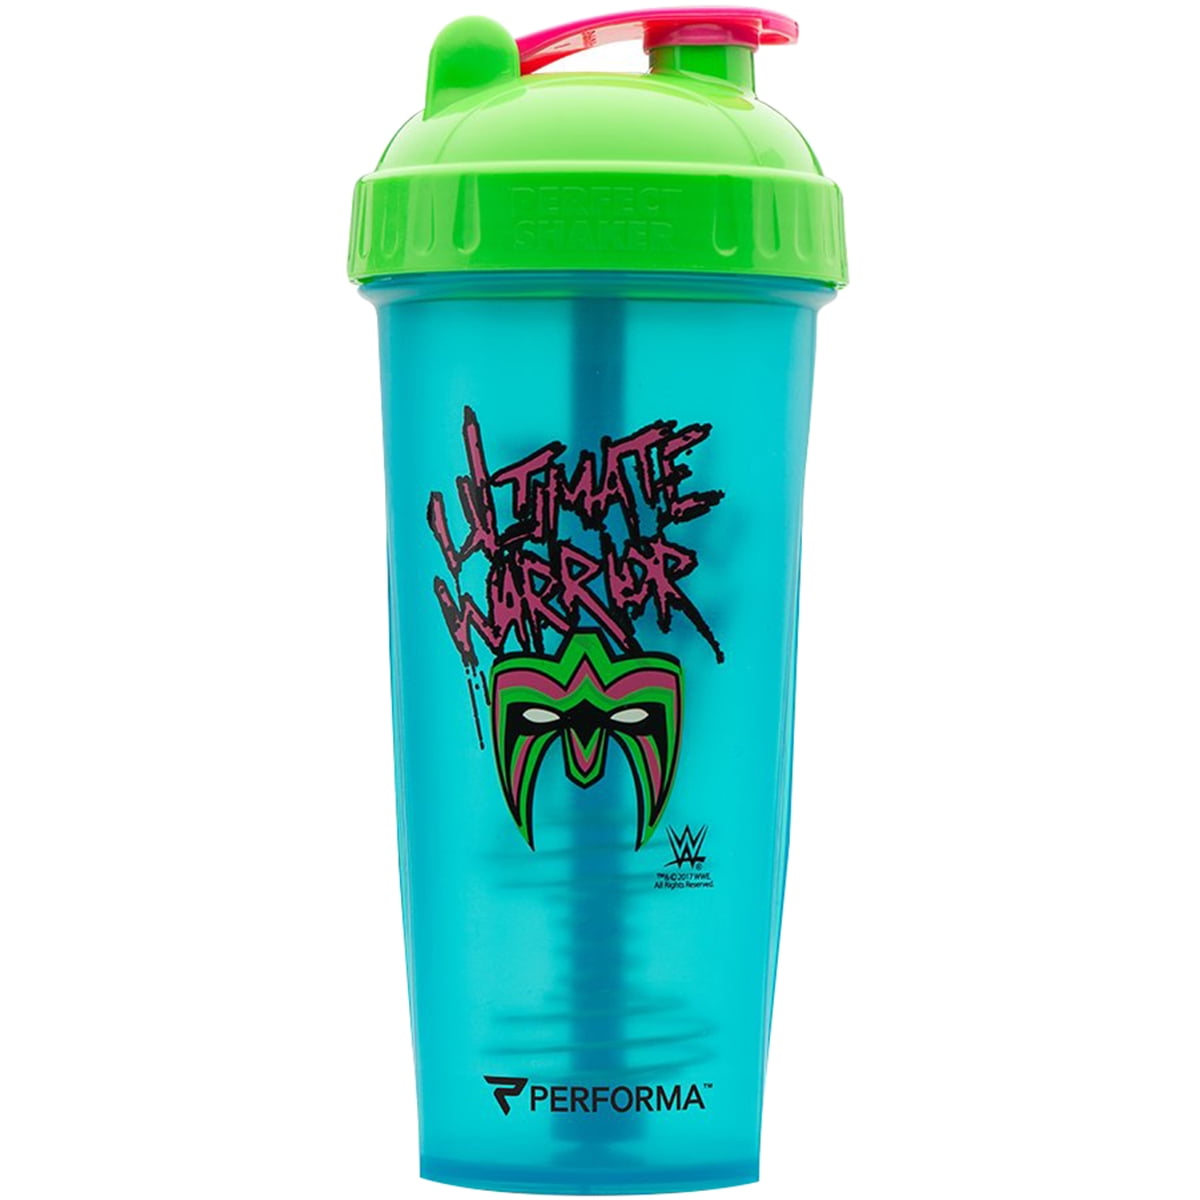 WWE Shop: EXCLUSIVE WWE x G FUEL SHAKER CUPS AVAILABLE NOW!